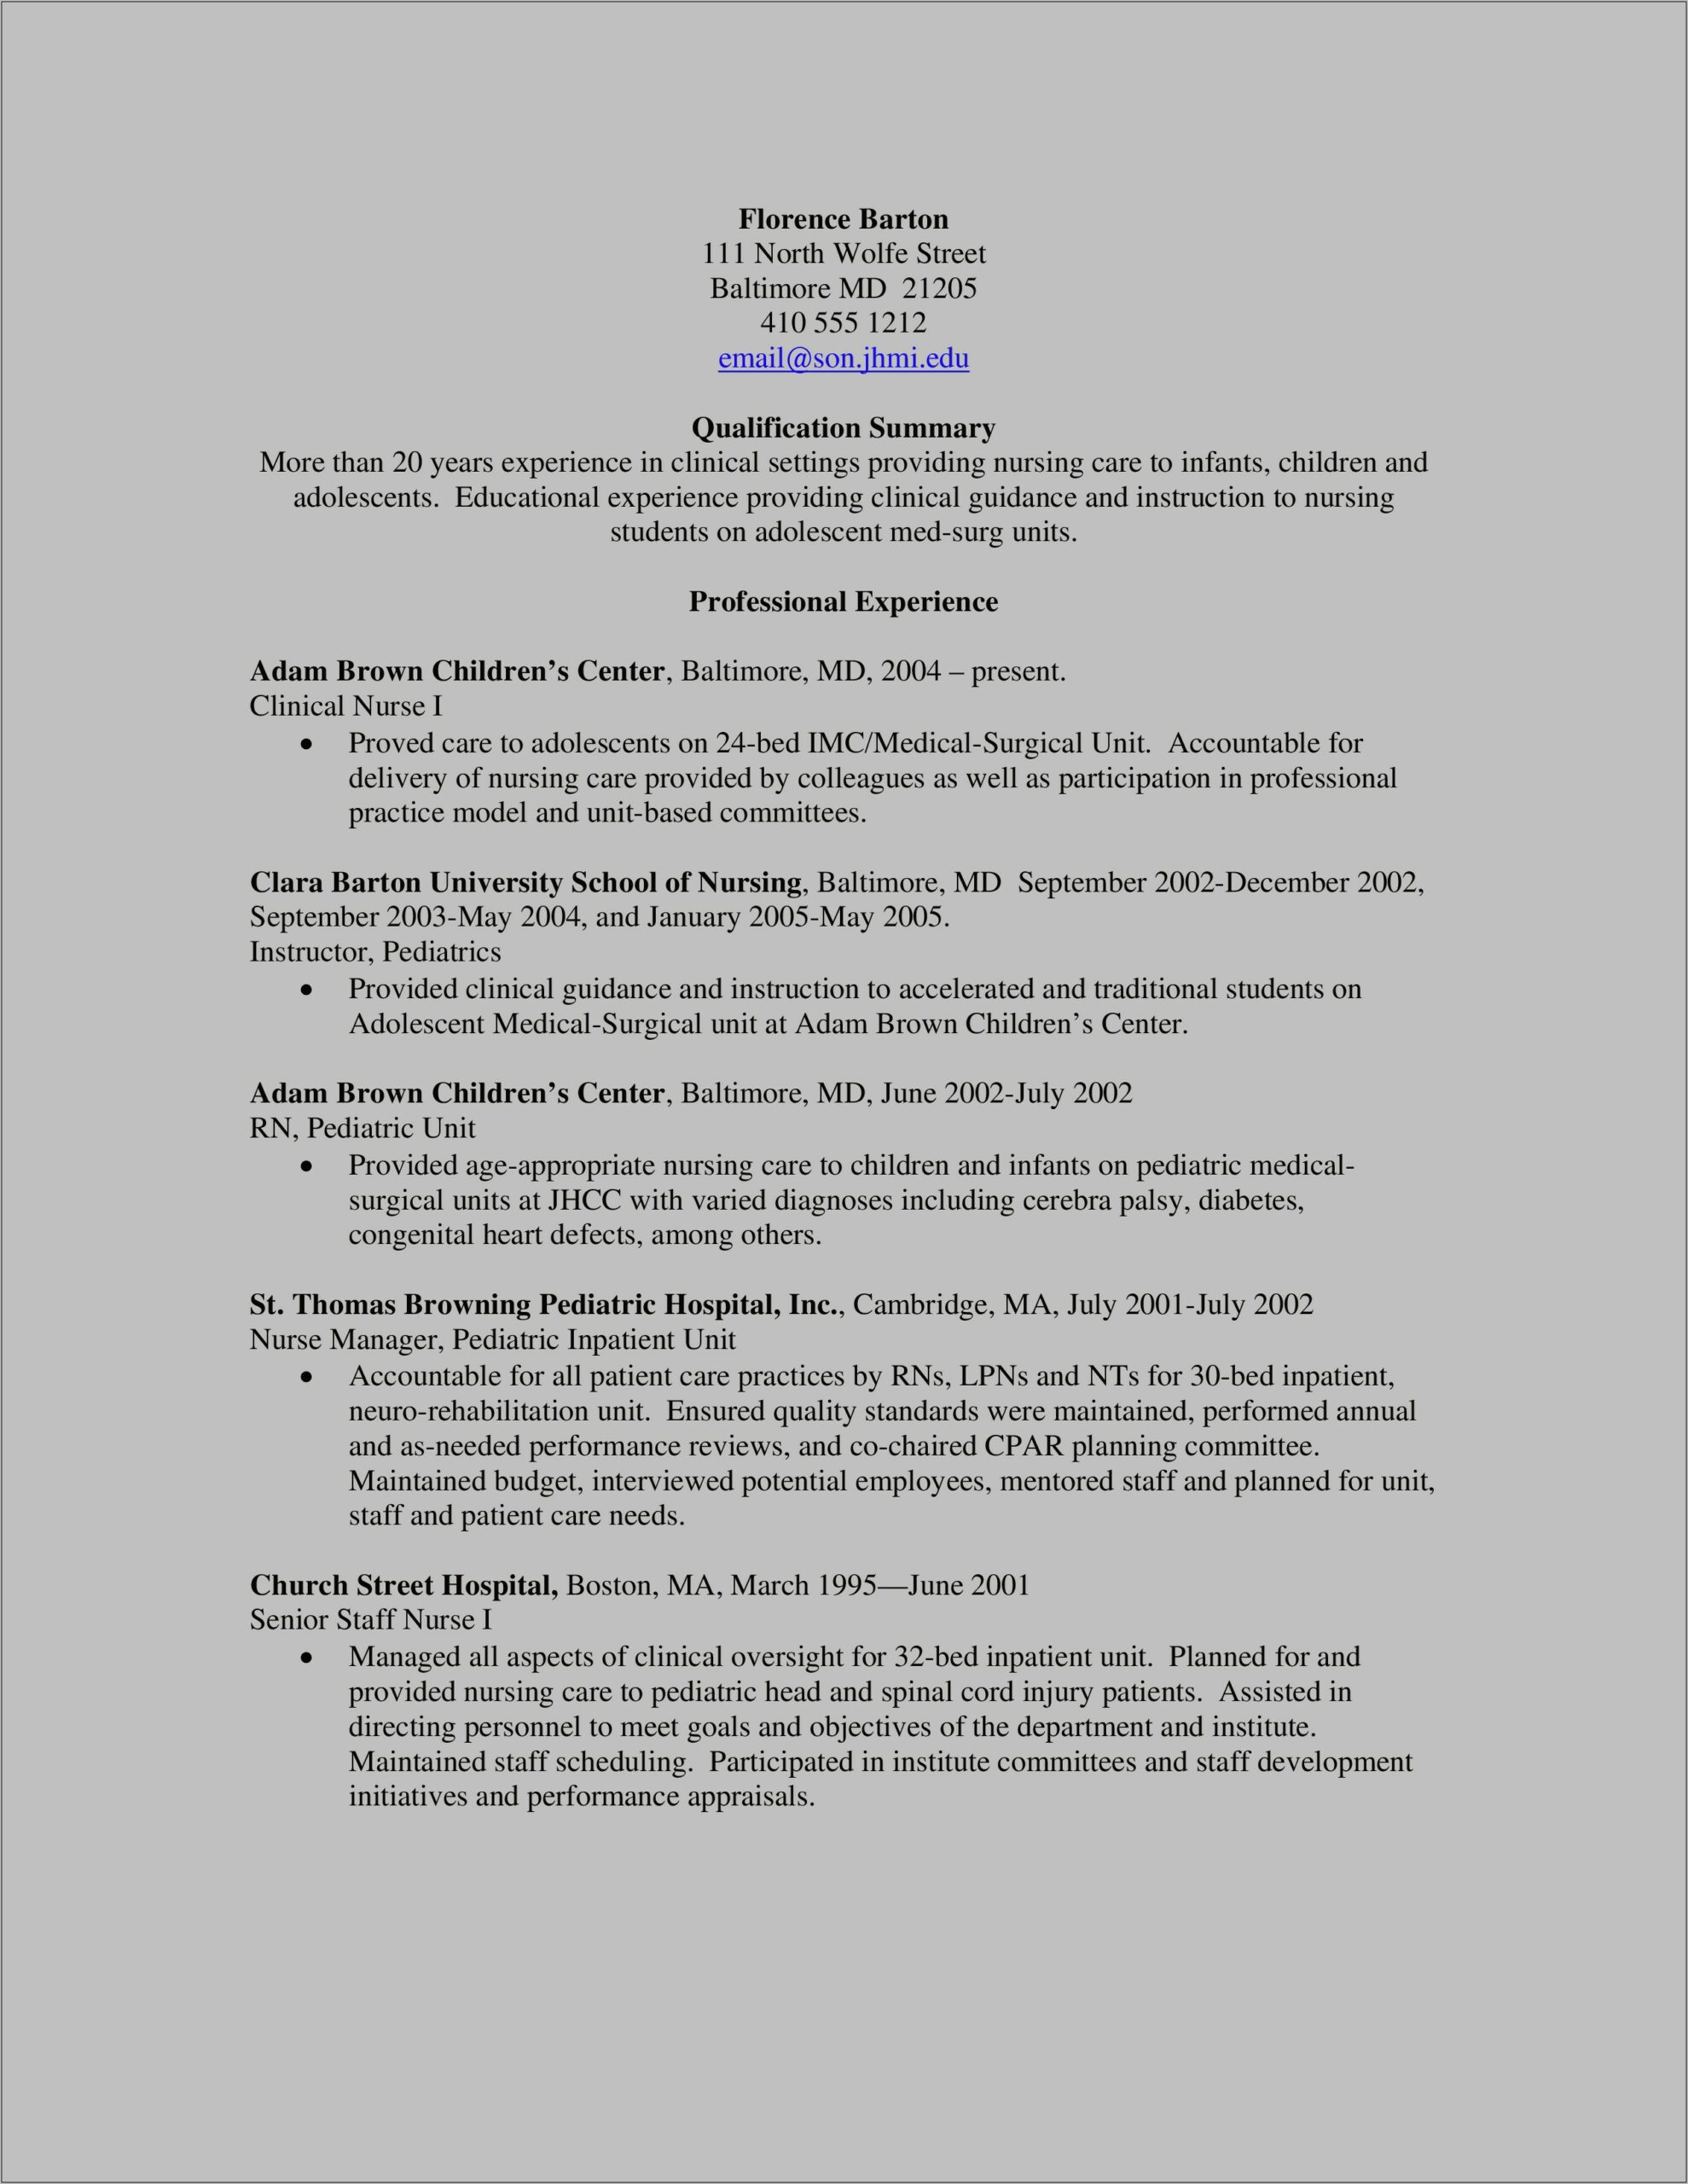 Case Manager Social Work Resume Summary